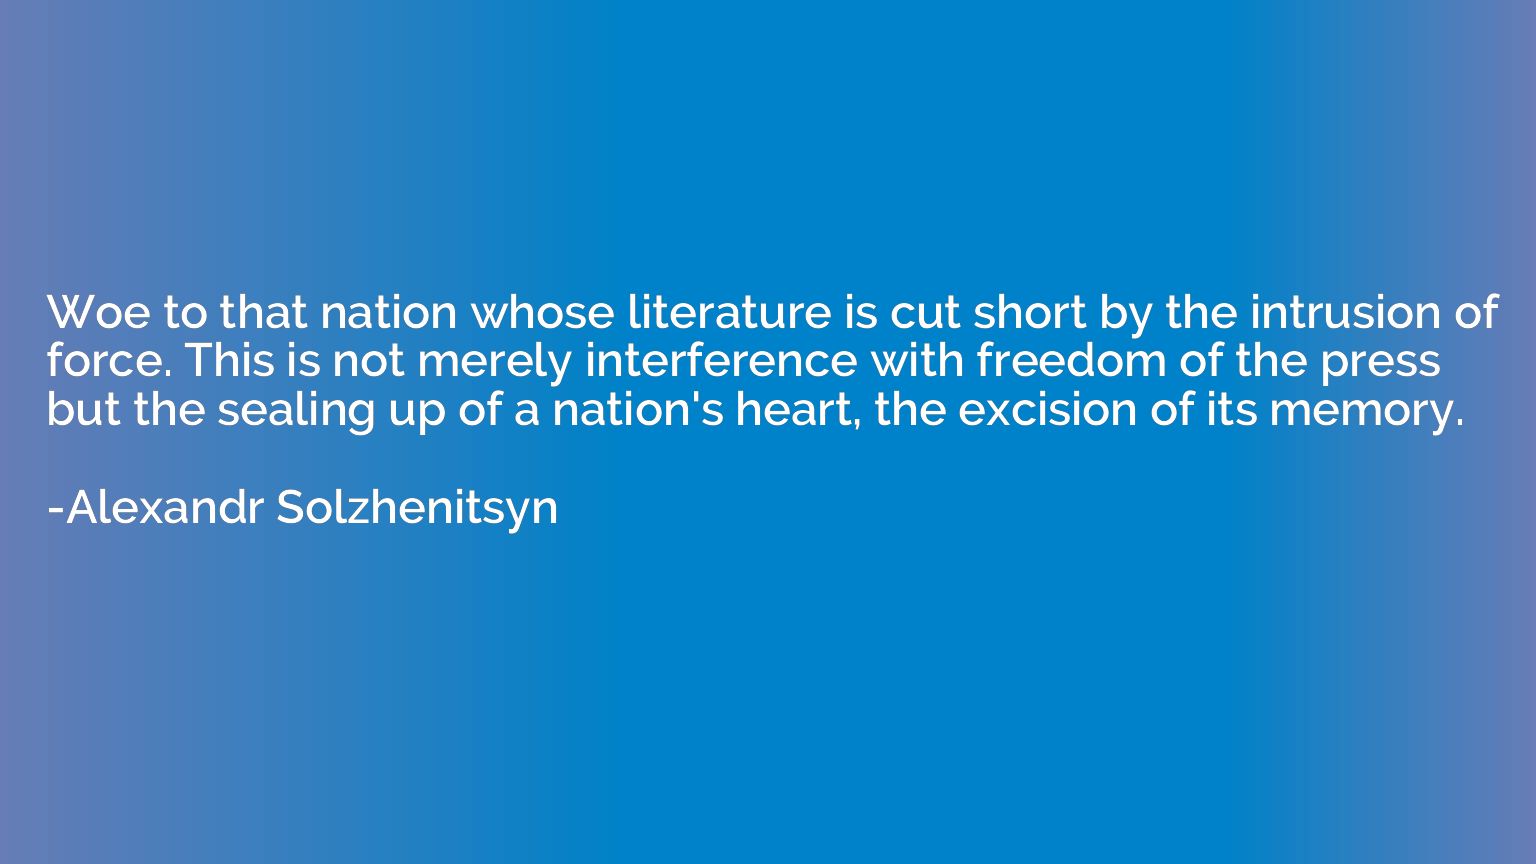 Woe to that nation whose literature is cut short by the intr